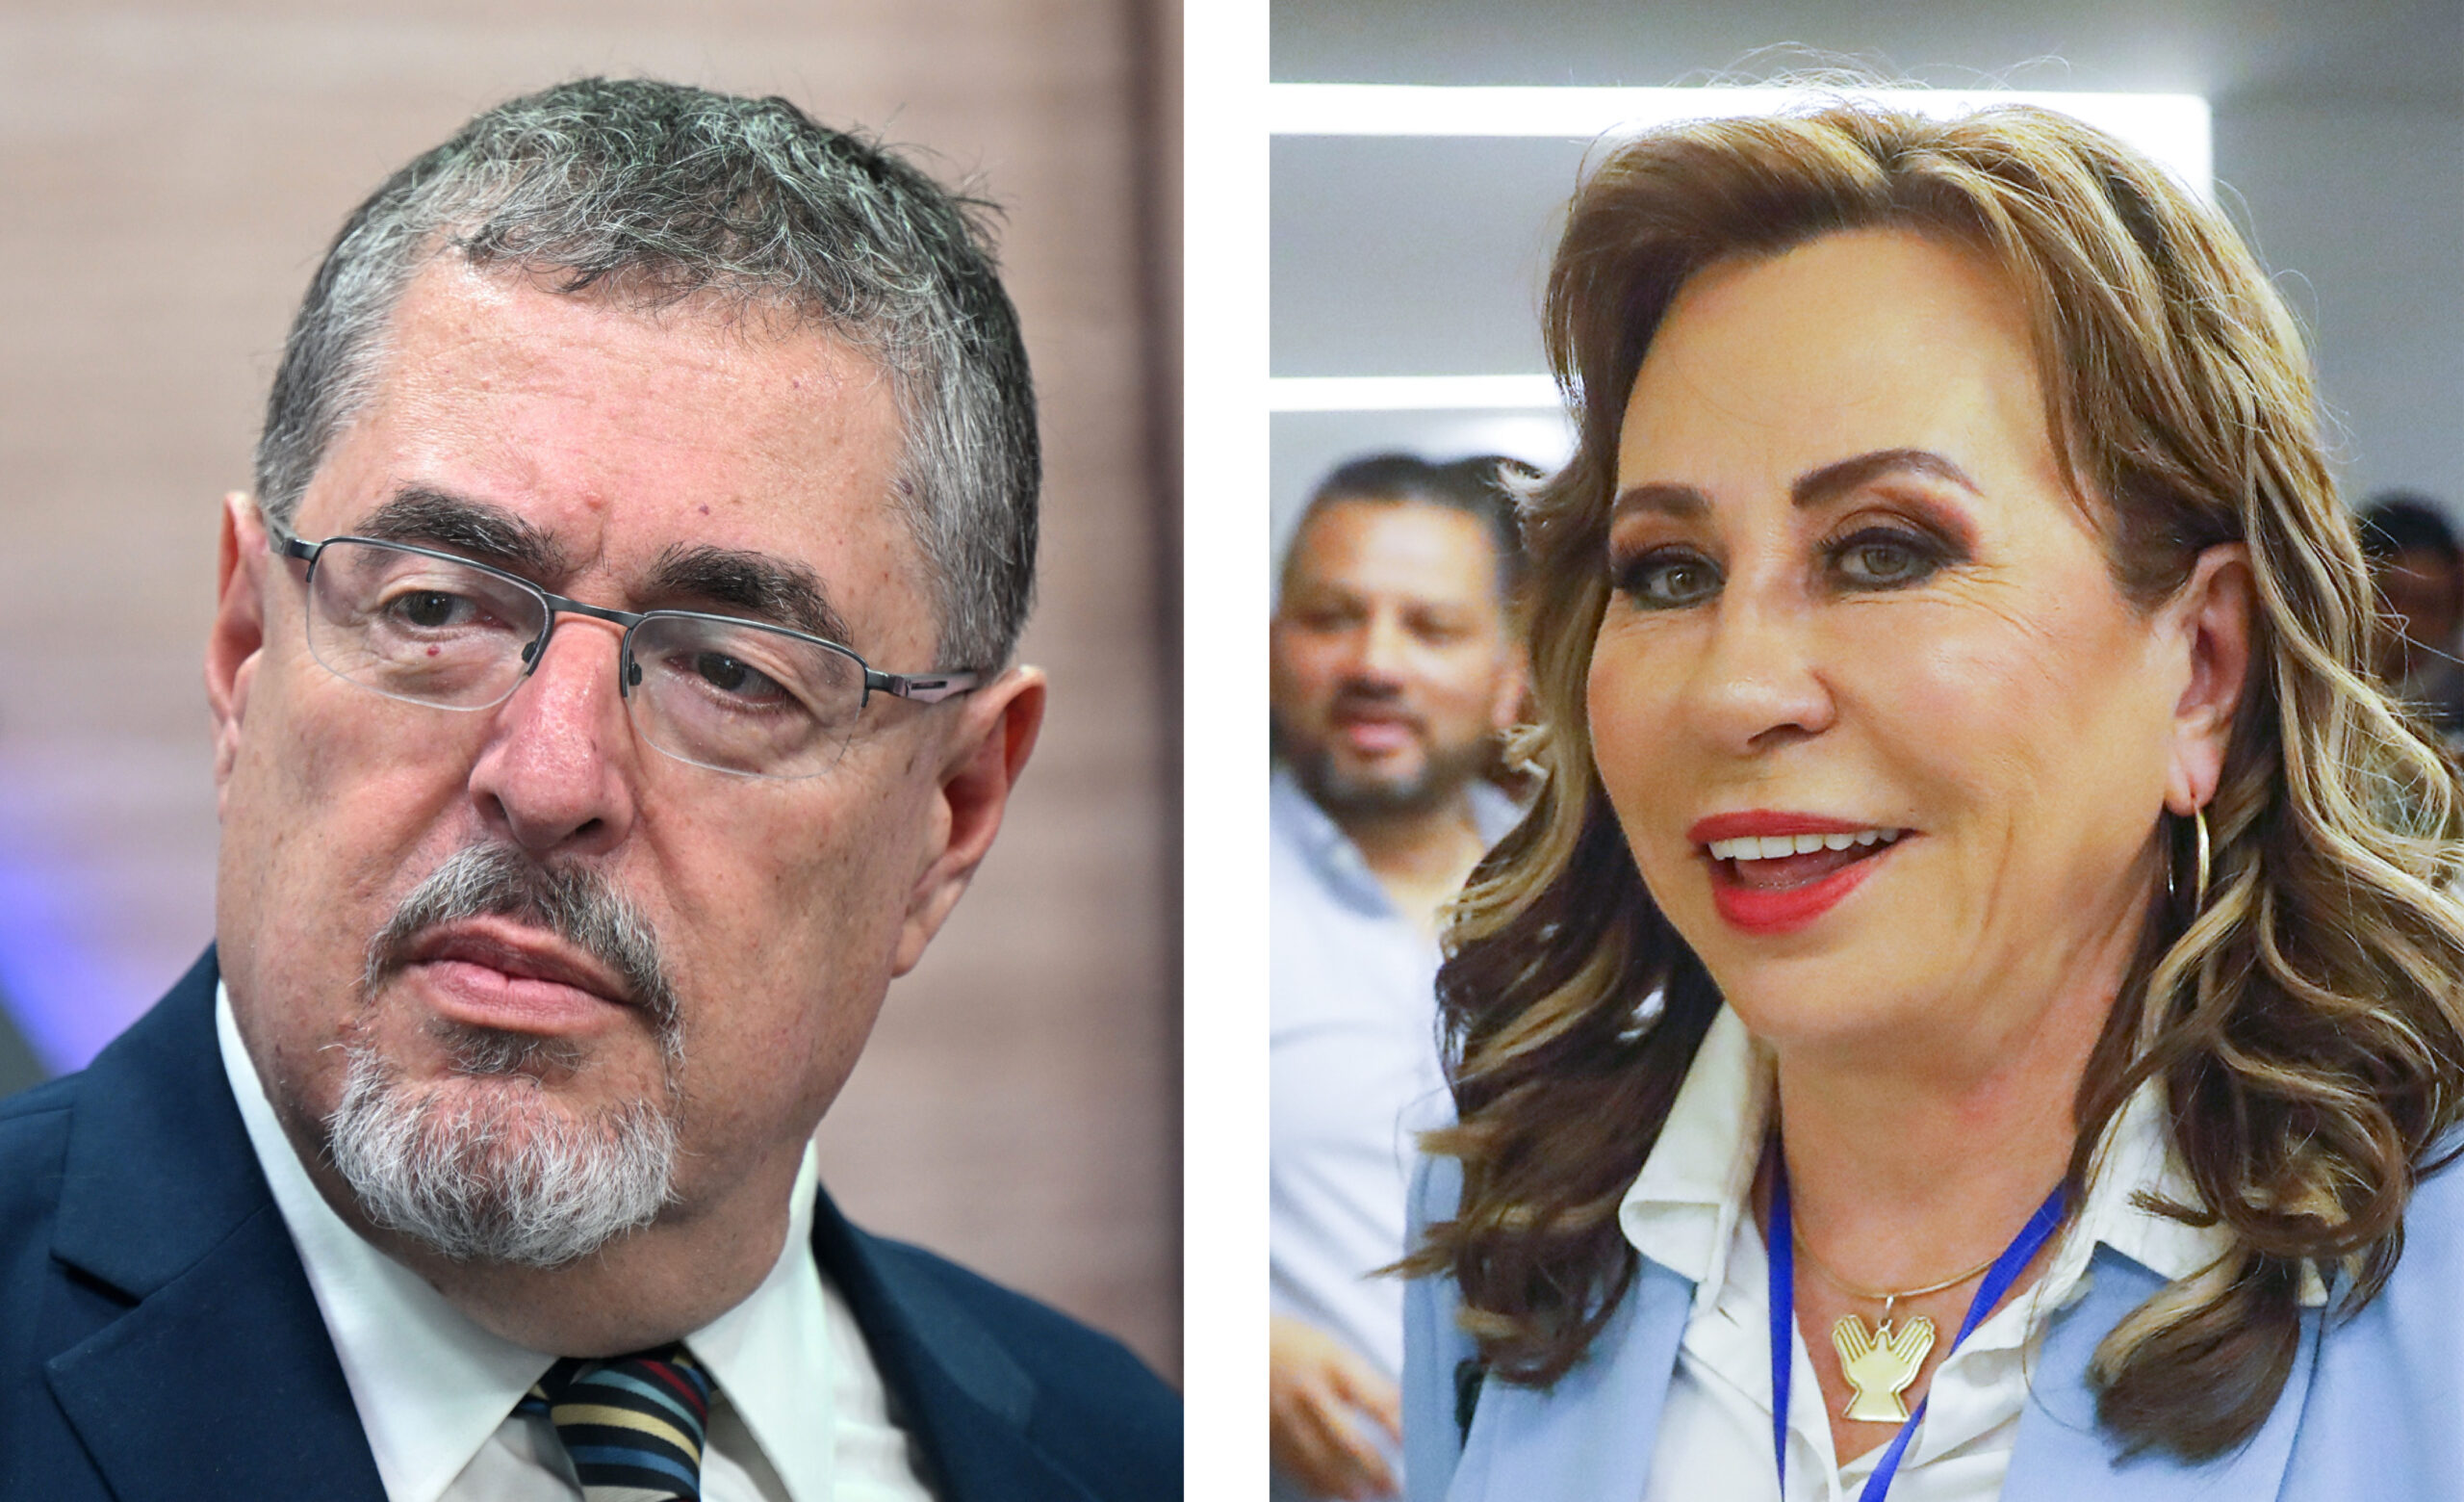 Guatemalan presidential election candidates Bernardo Arévalo and Sandra Torres will head to a runoff election on August 20.